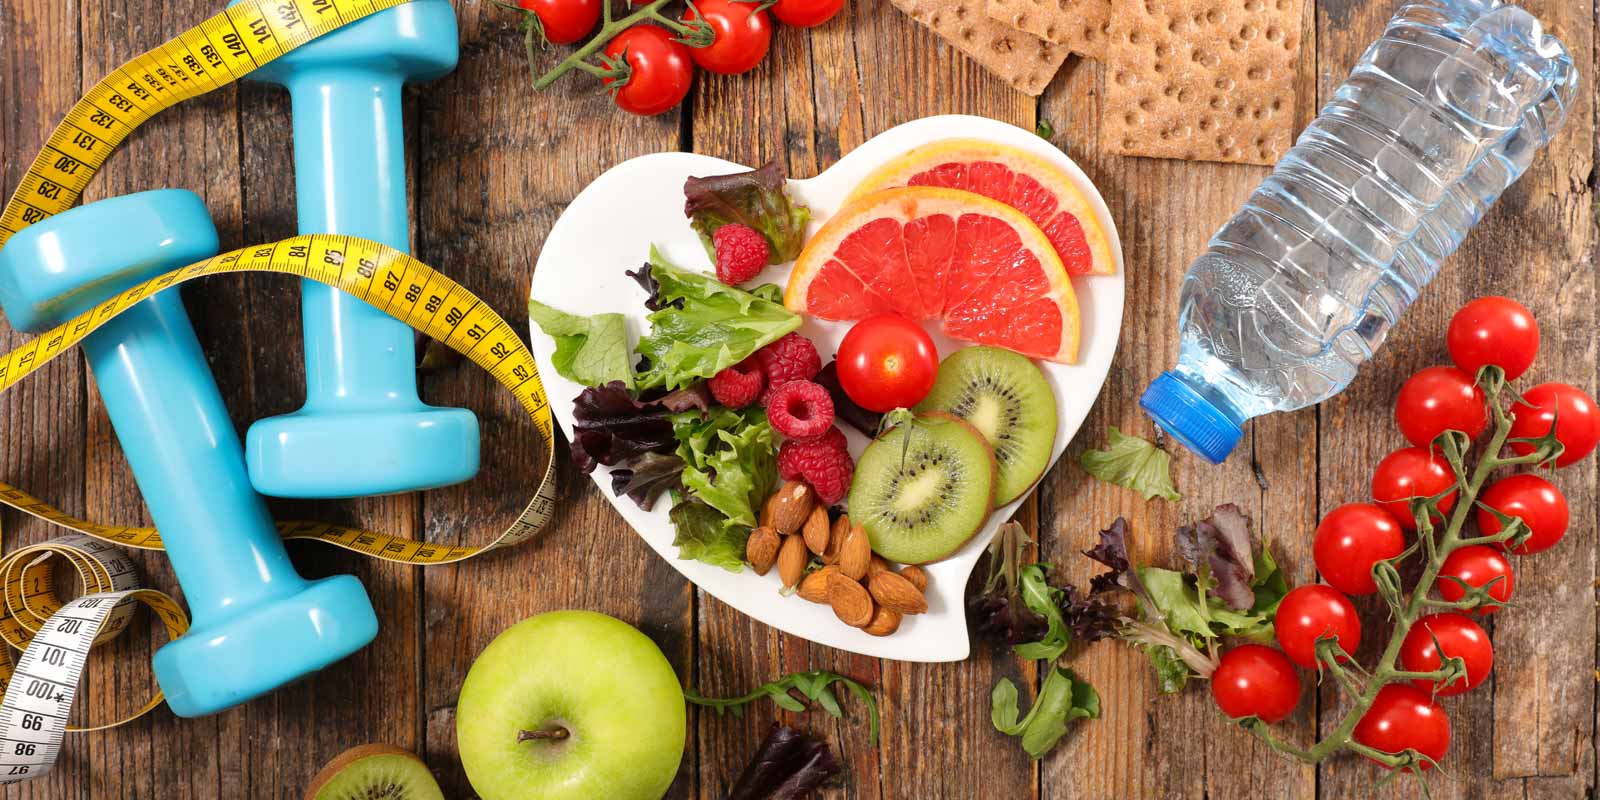 Top Nutrition Tips For A Healthier Diet